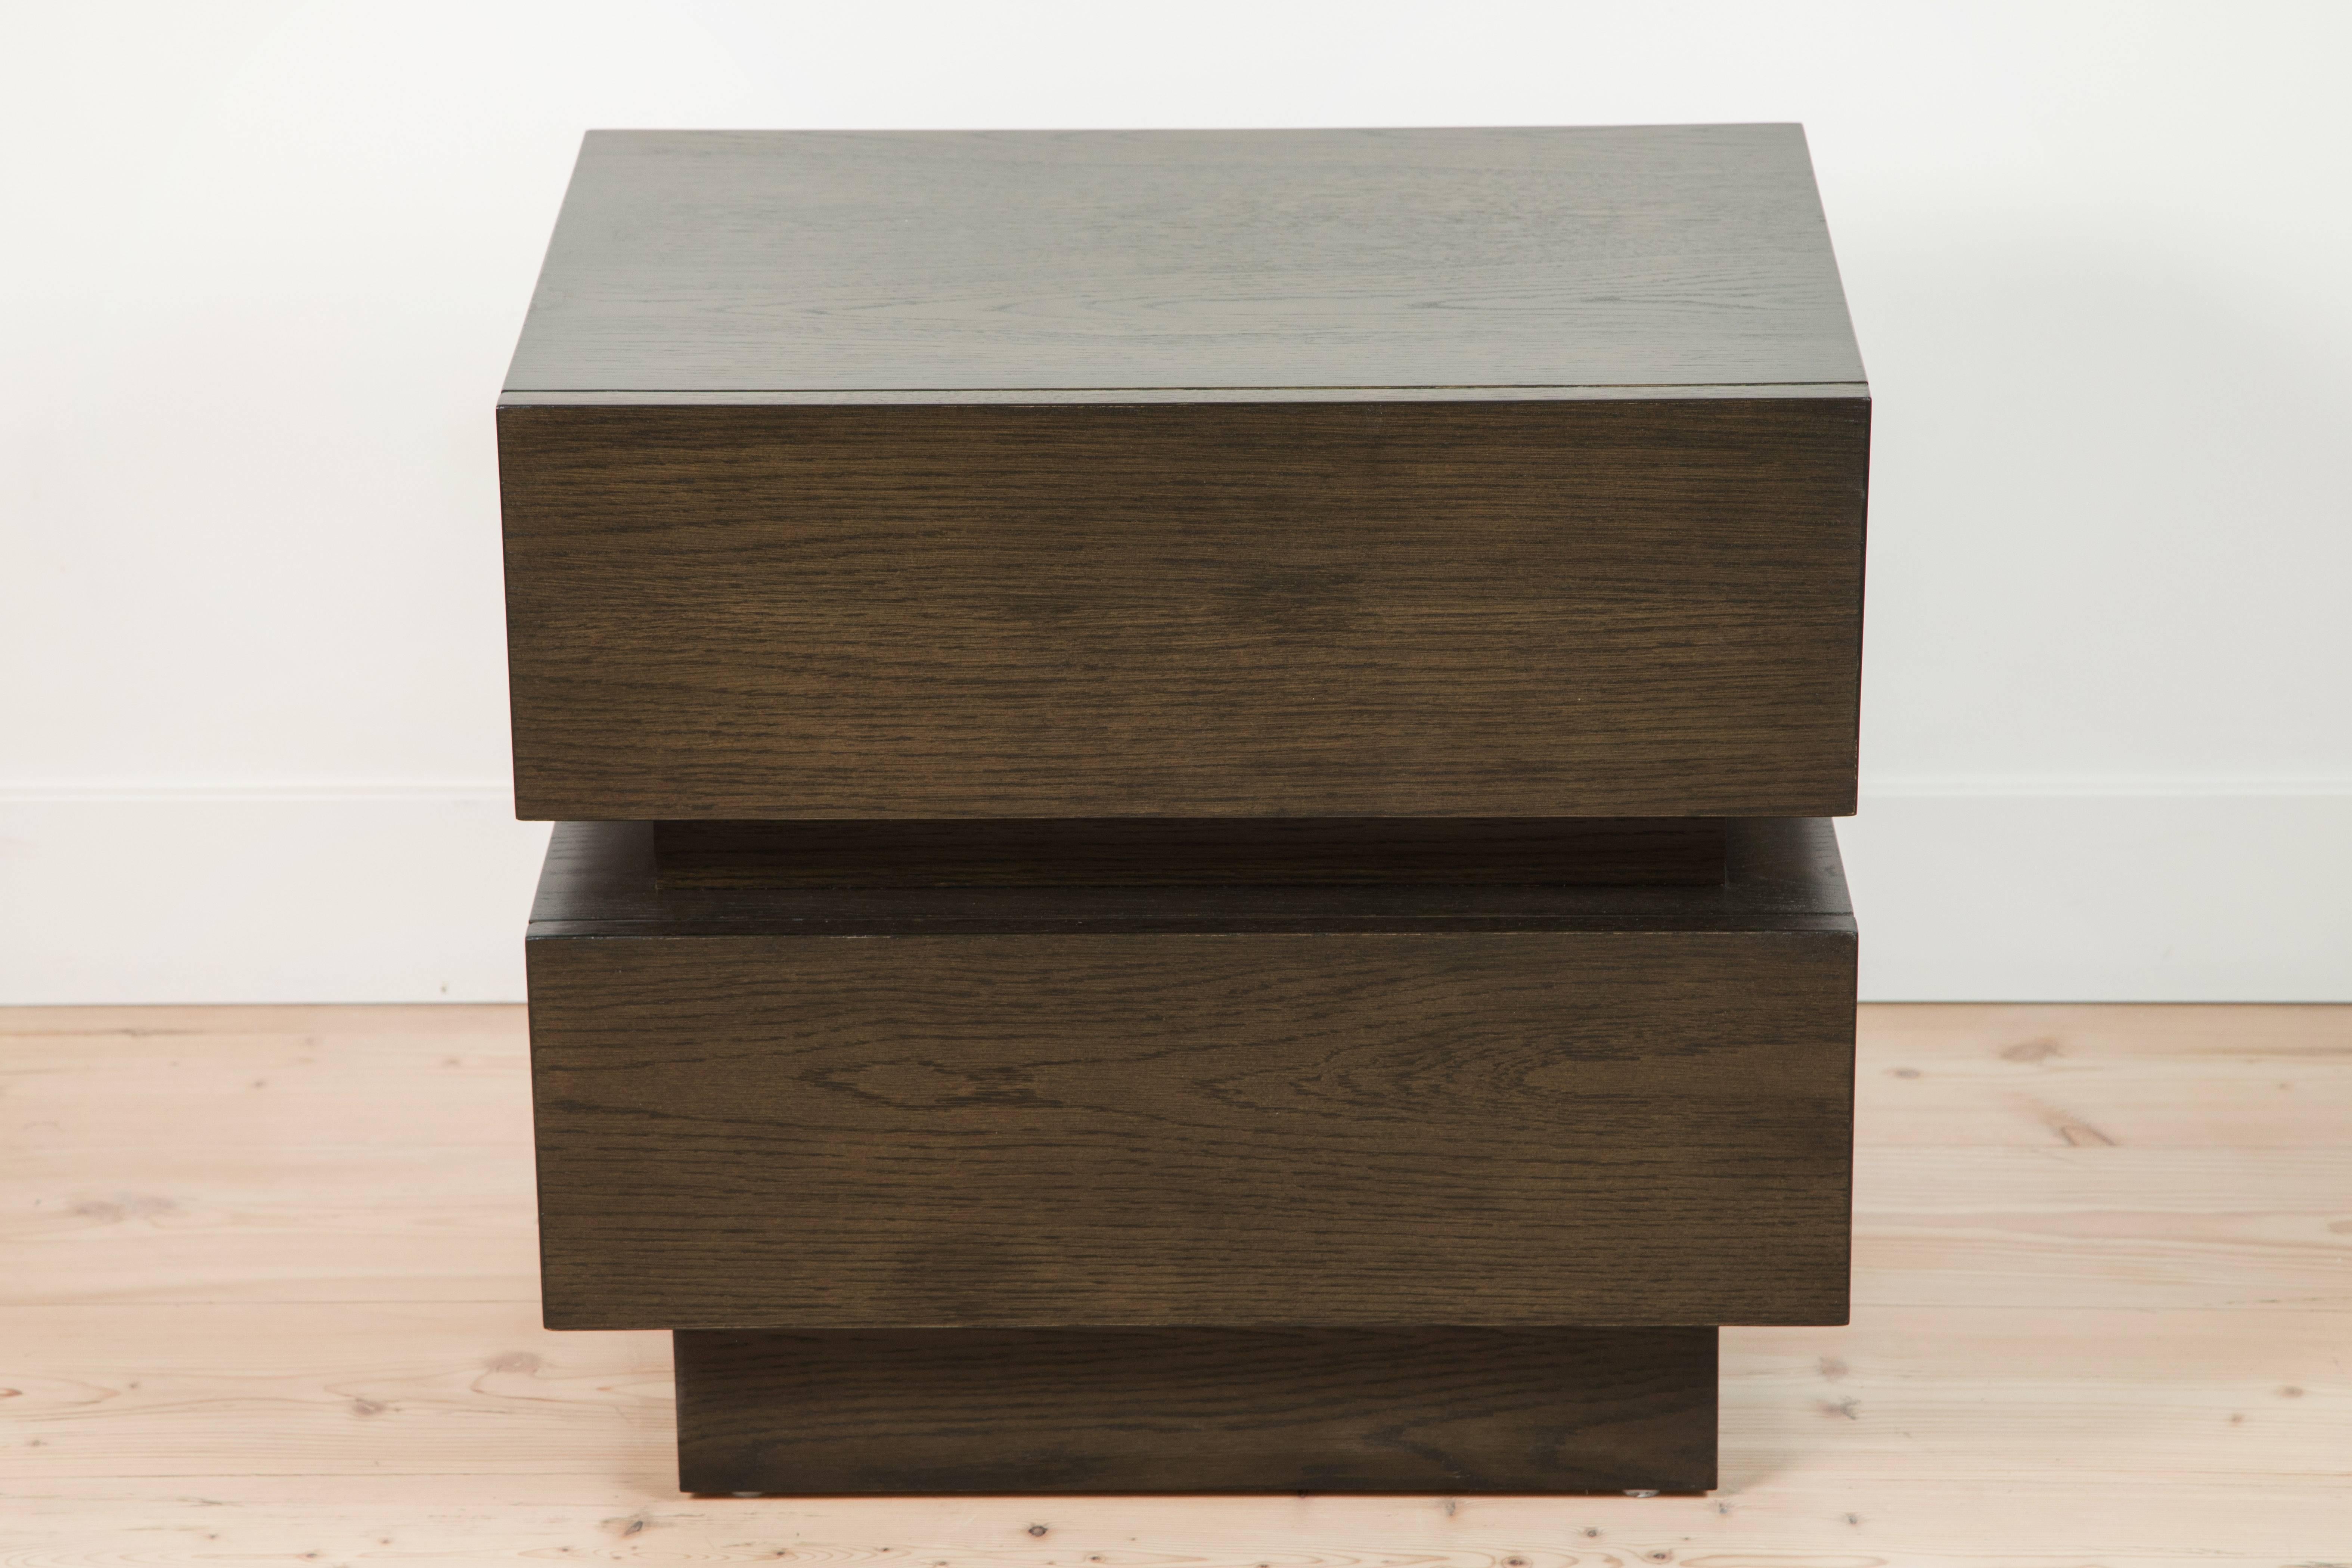 Pair of small stacked box nightstands by Lawson-Fenning in light greywashed oak.

Also available to order in various finishes with a 10-12 week lead time.